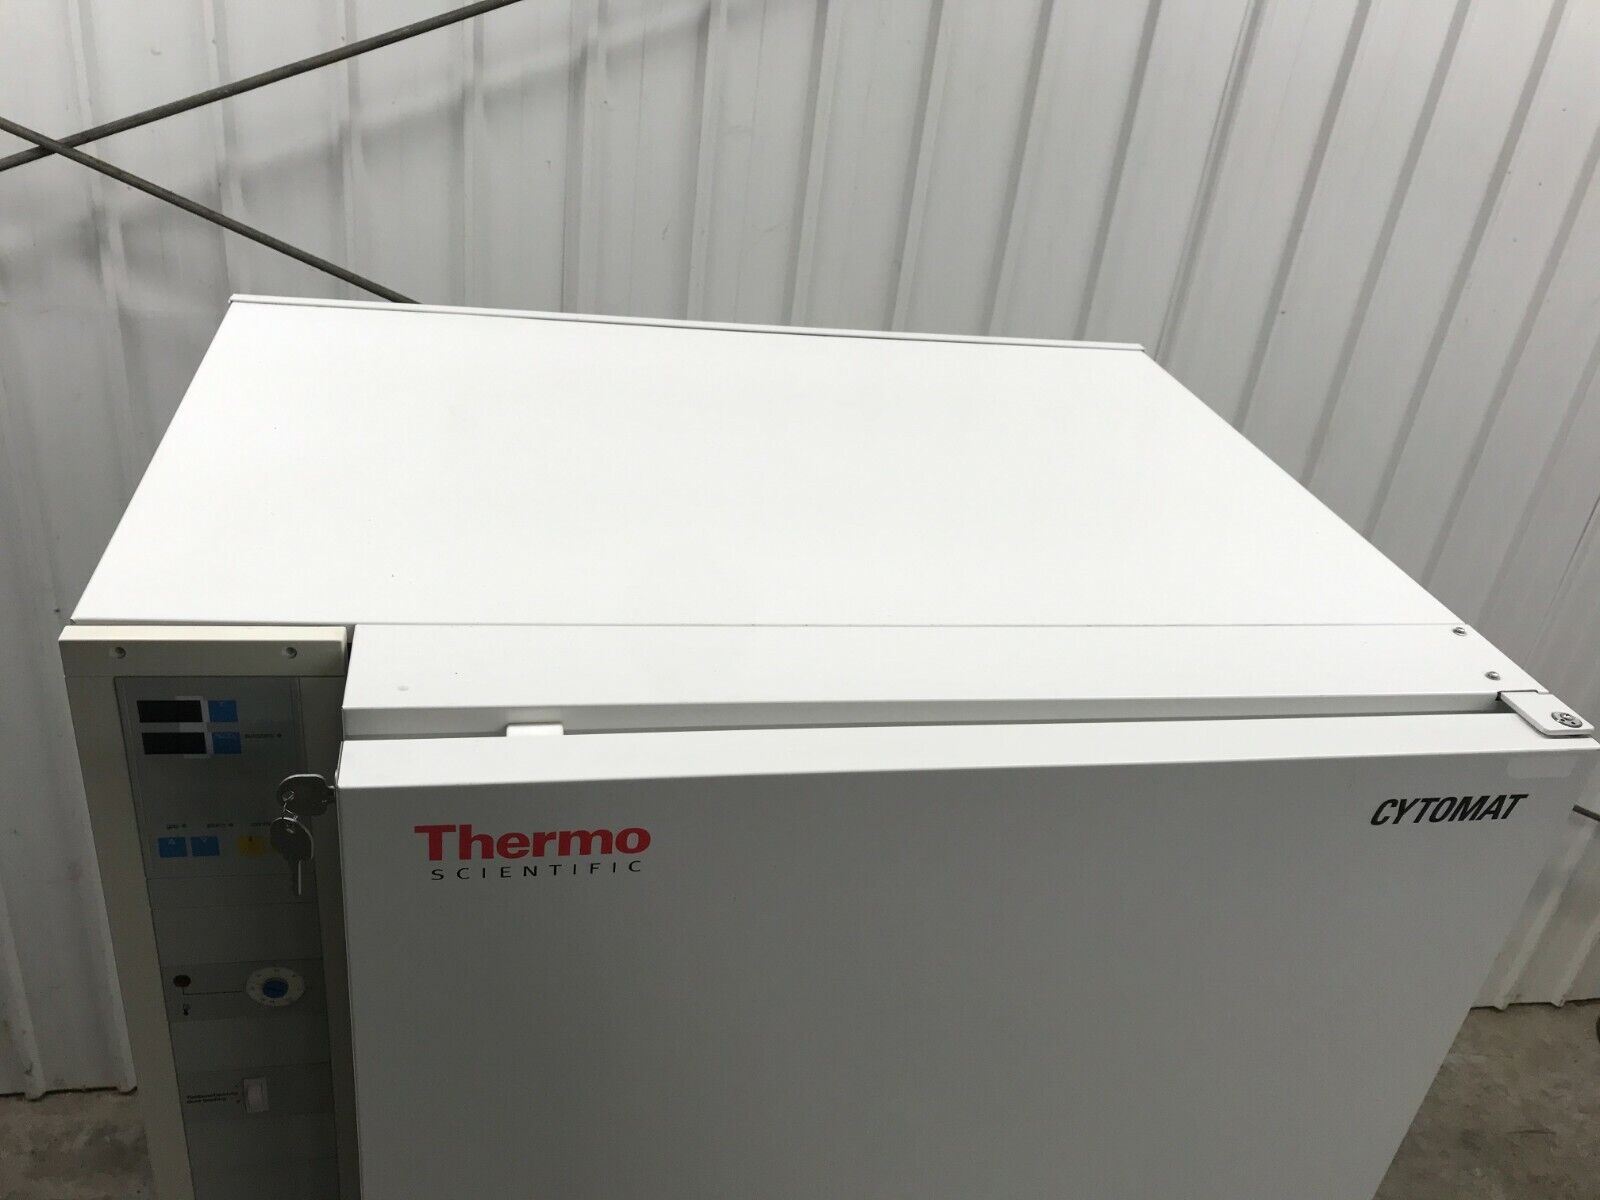 Thermo Electron Scientific Cytomat 6000 K Automatic Laboratory Incubator System